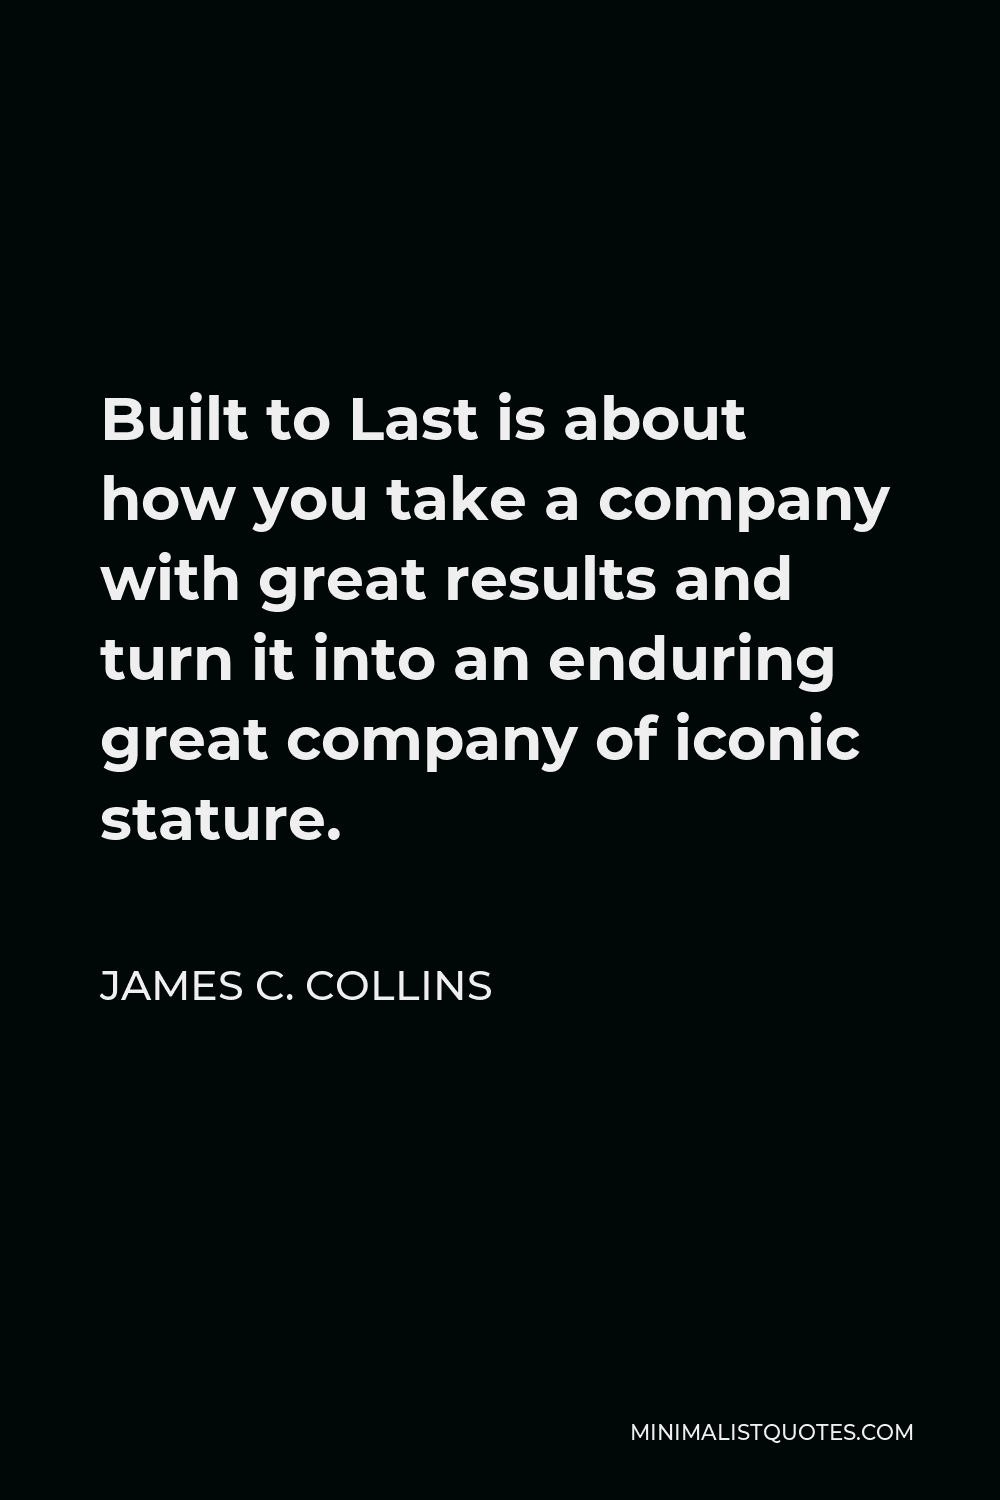 James C. Collins Quote - Built to Last is about how you take a company with great results and turn it into an enduring great company of iconic stature.